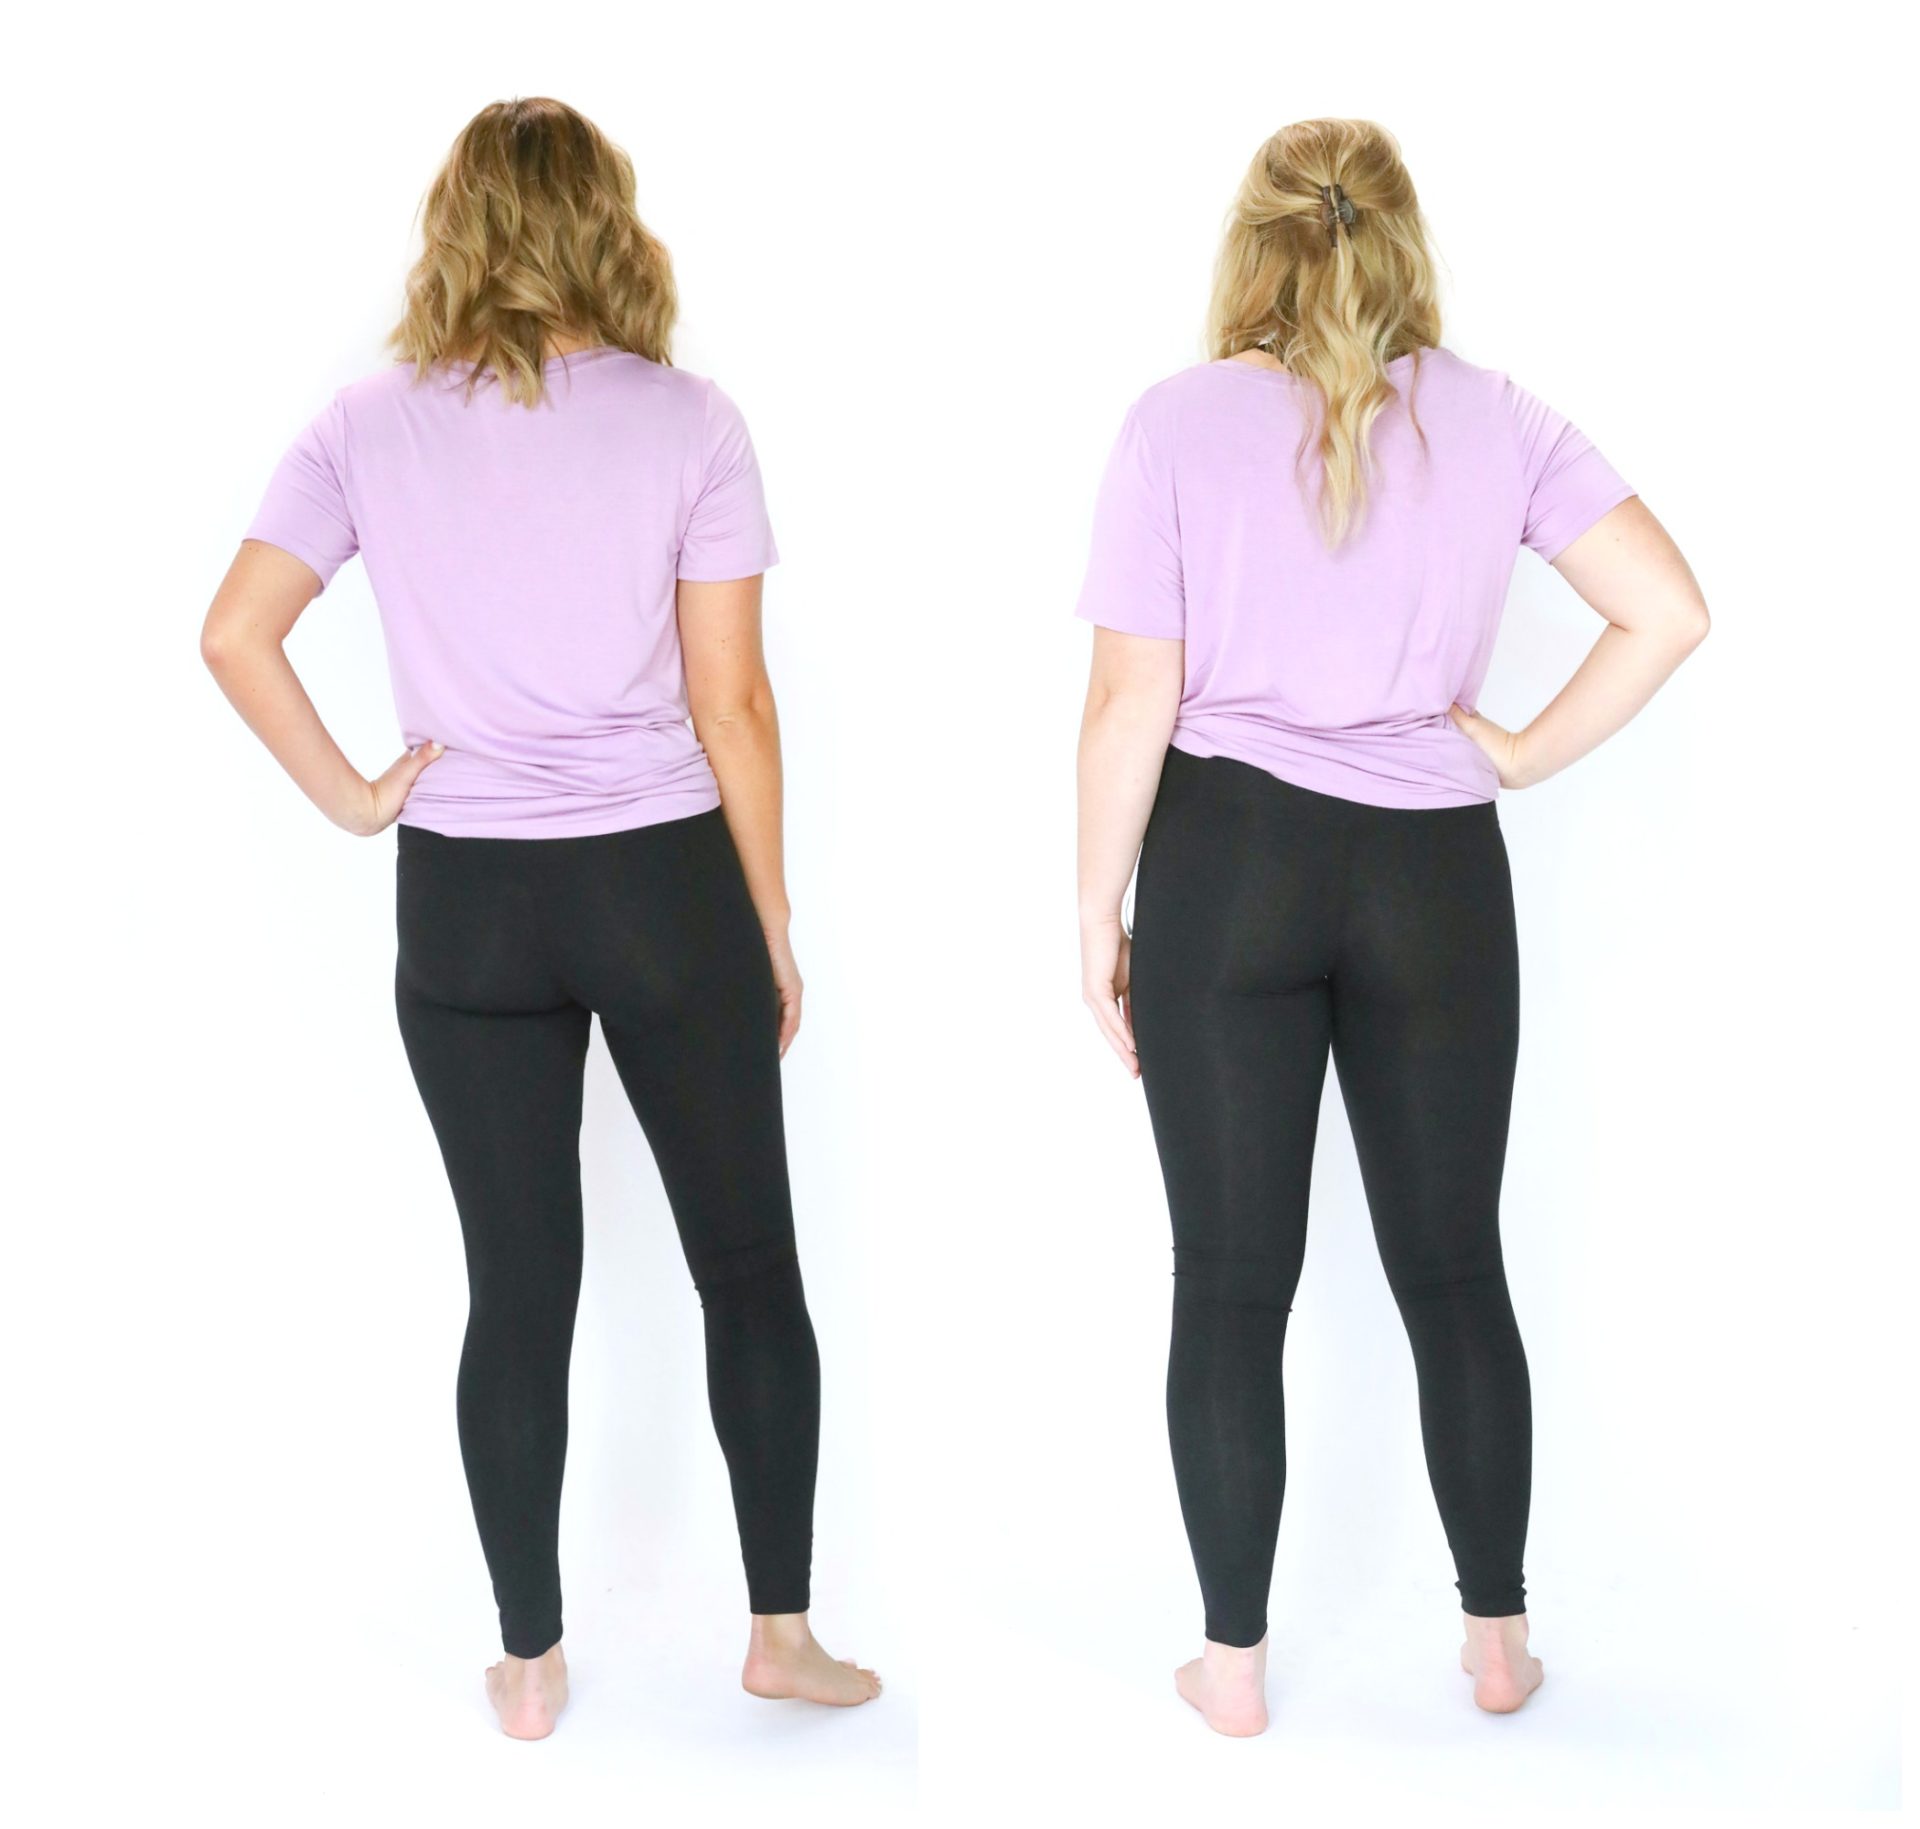 Spanx Booty Boost Leggings Are The Most Flattering Leggings I Own